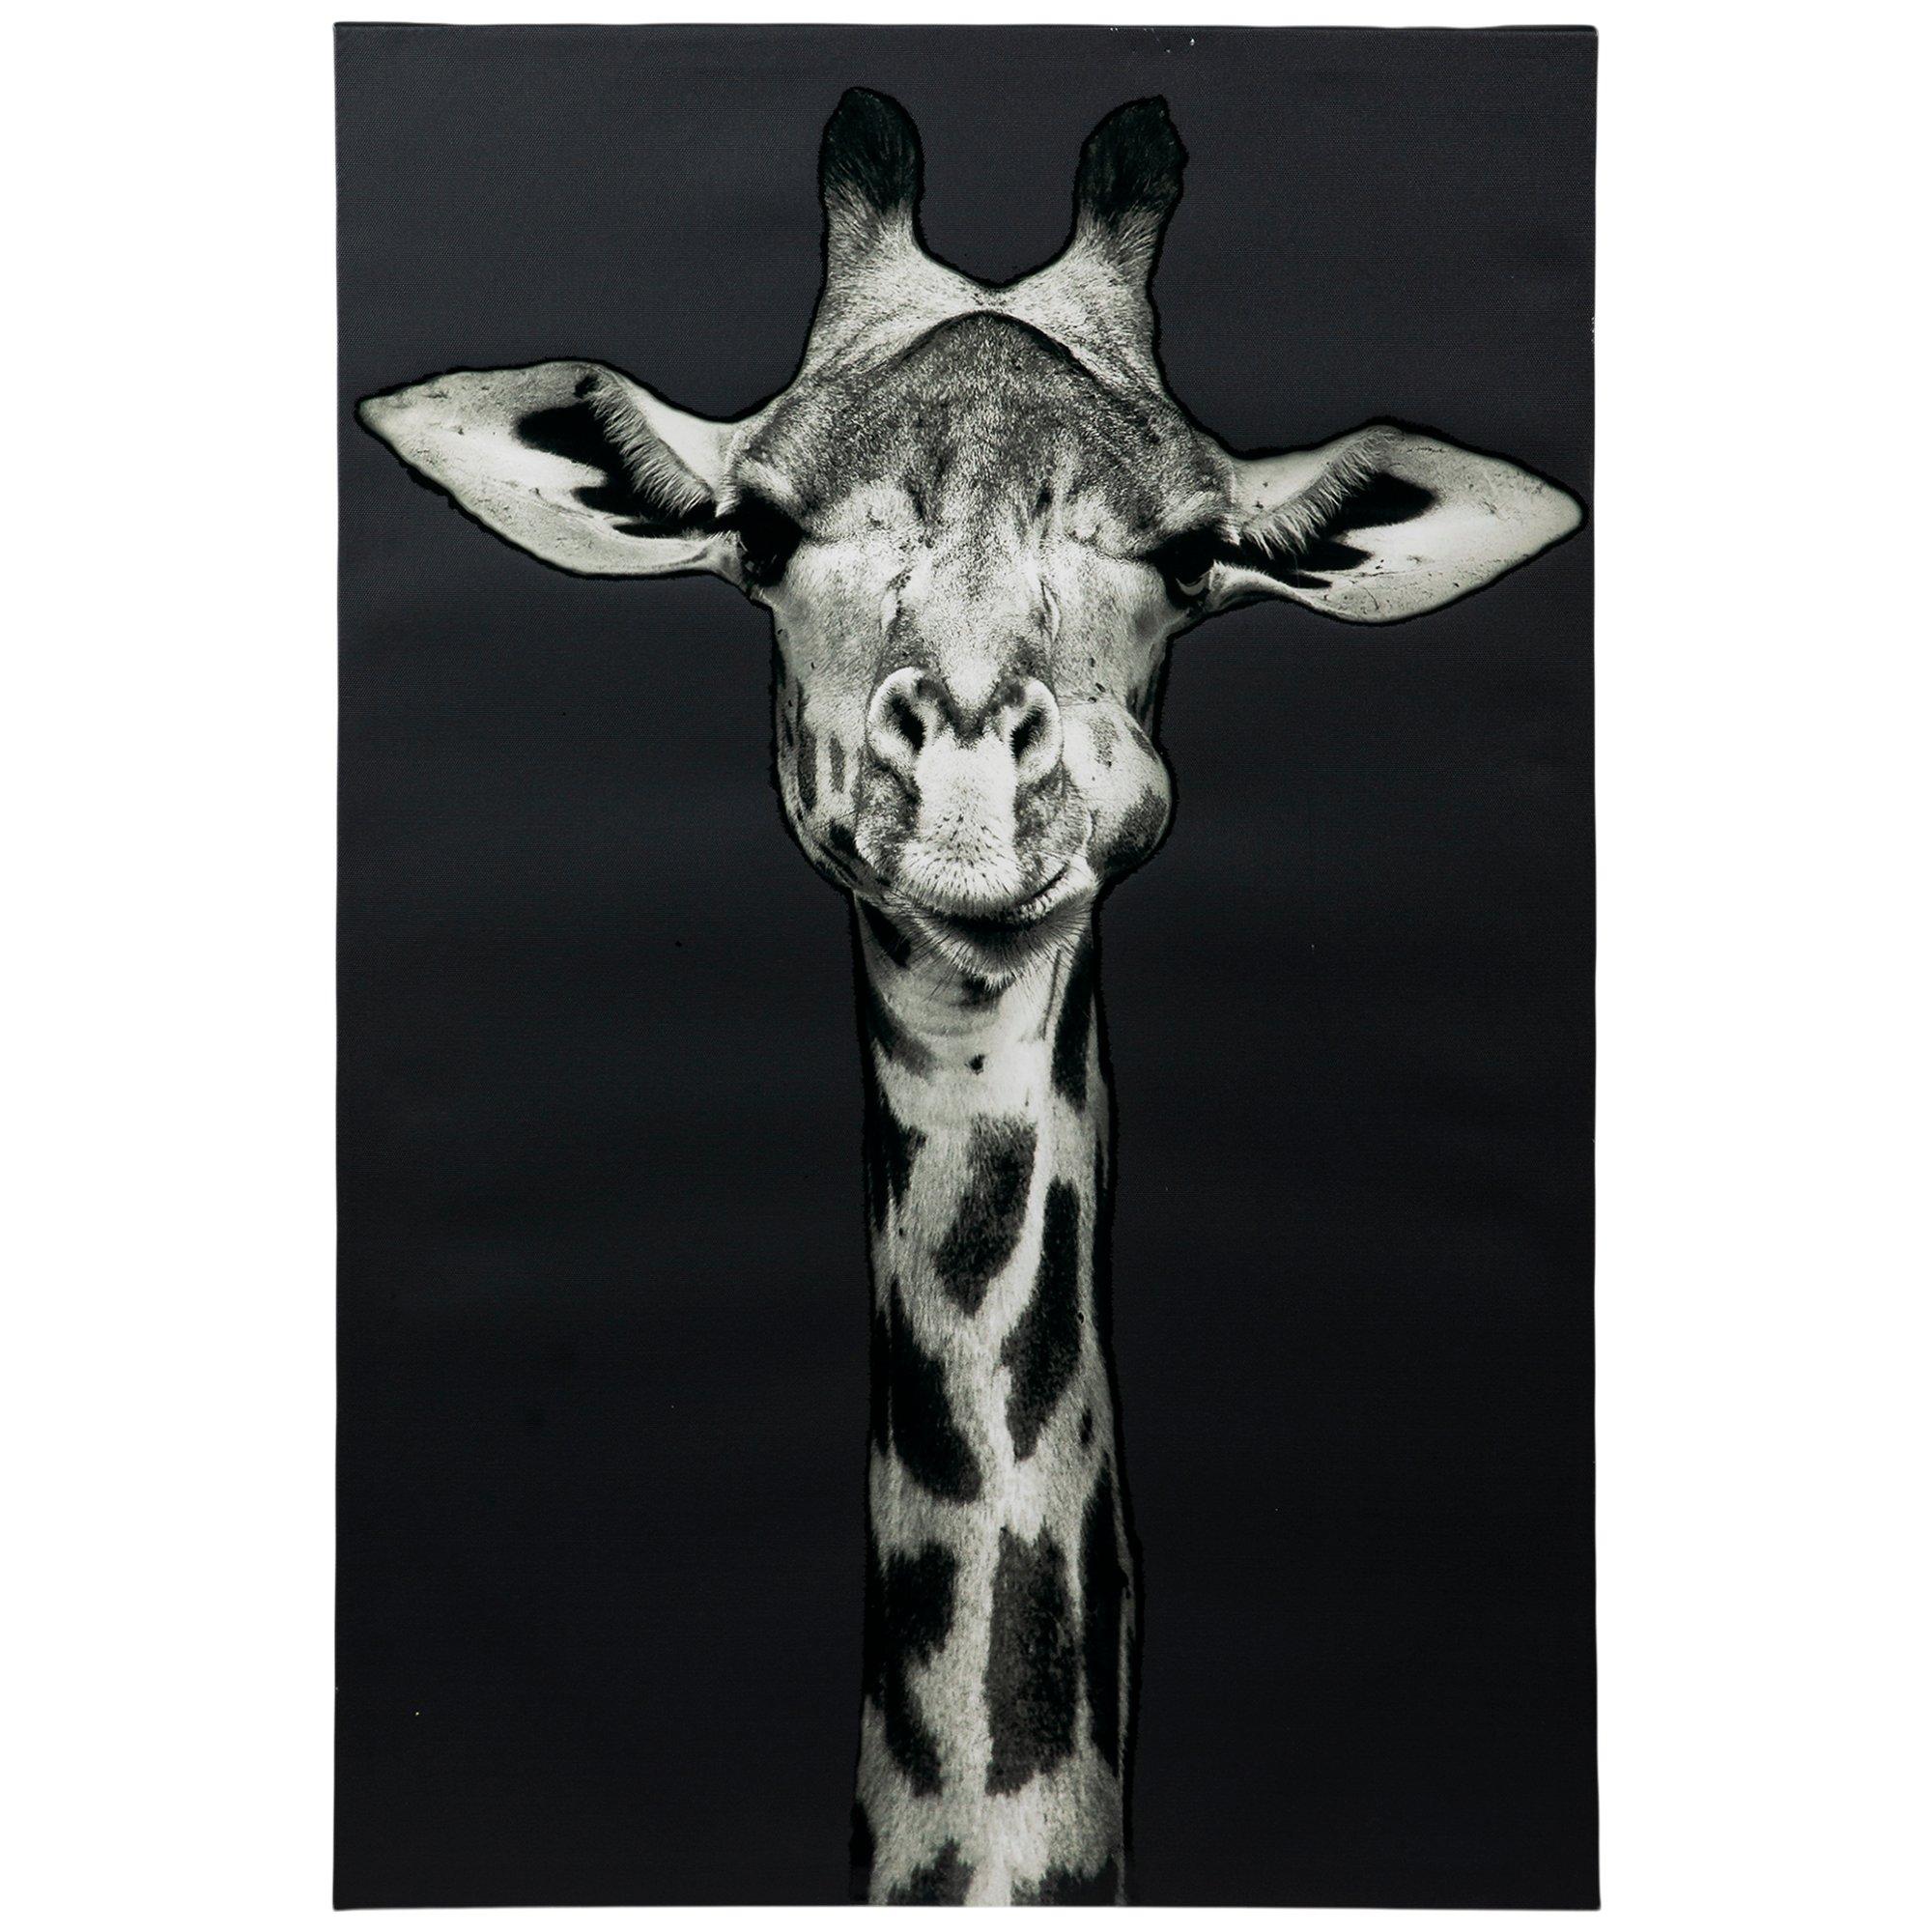 giraffe pictures black and white